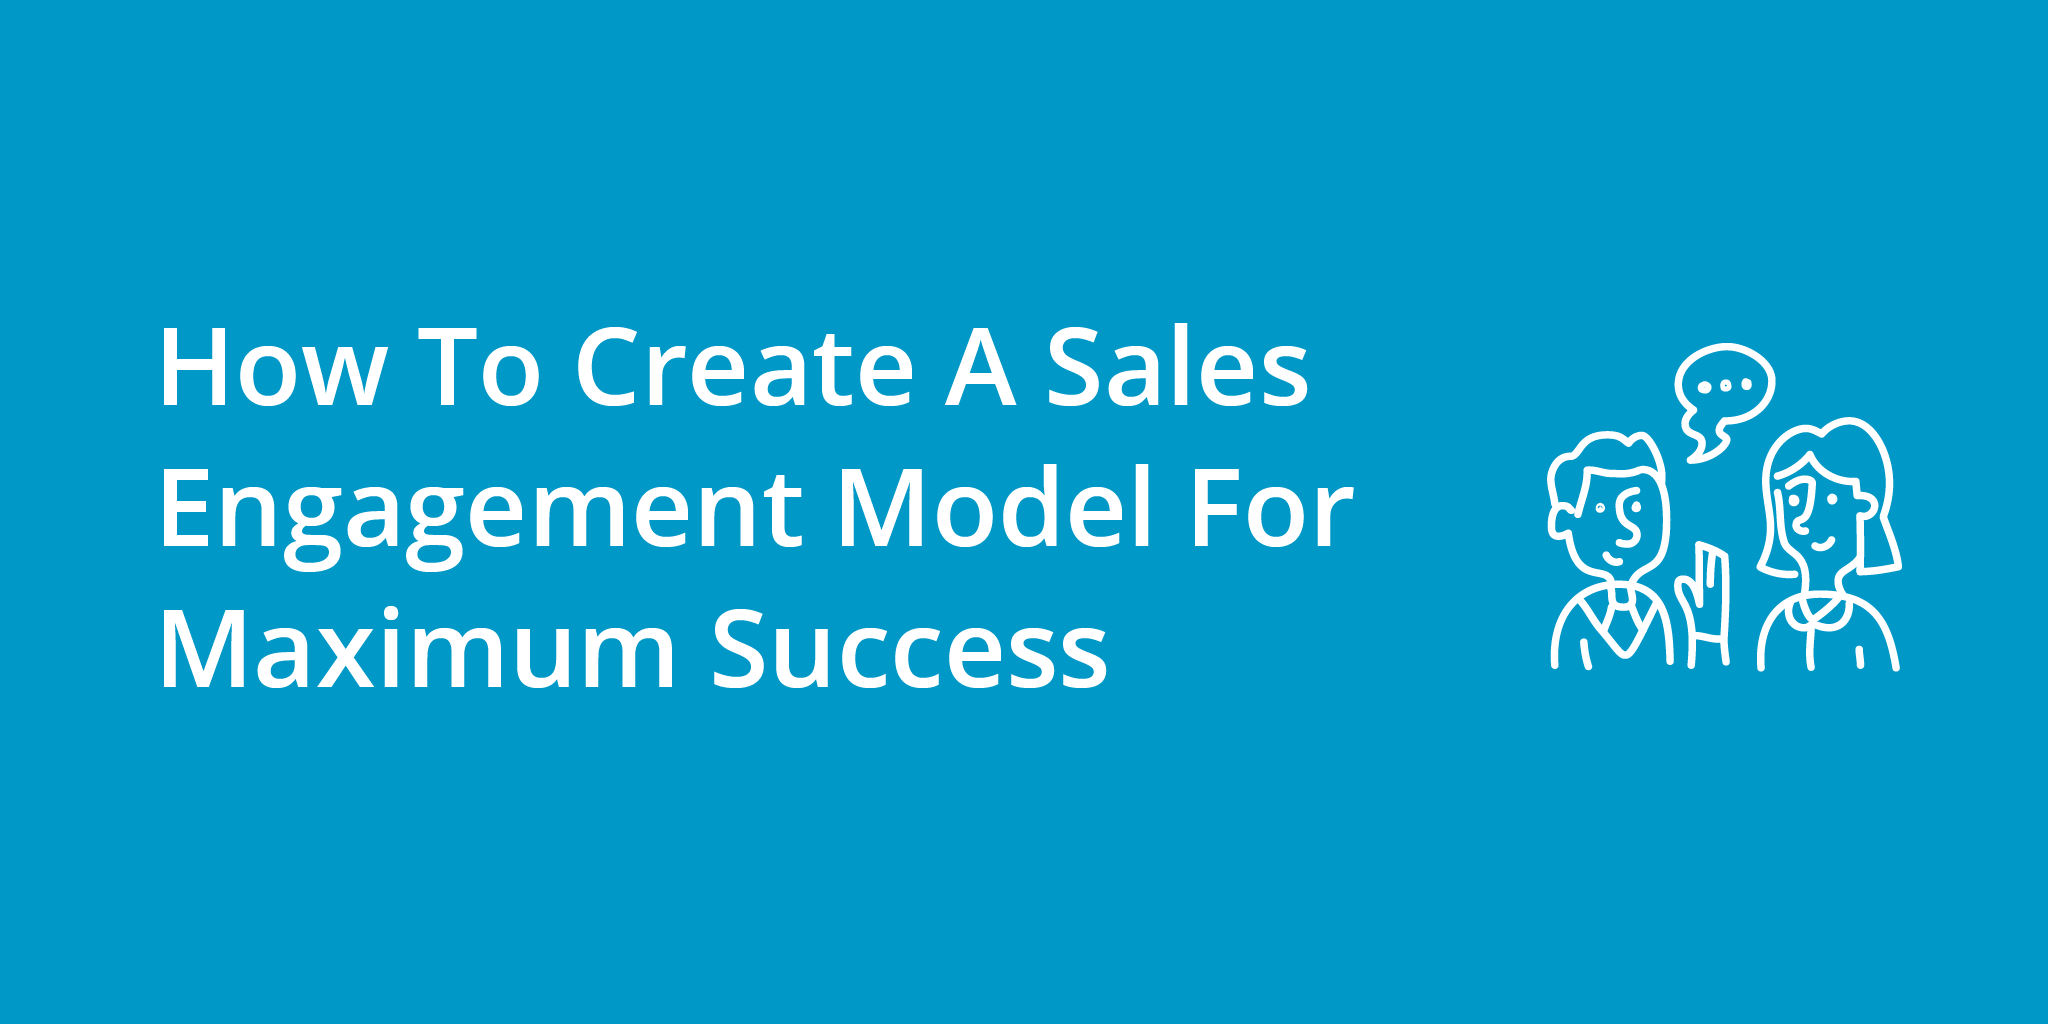 How To Create A Sales Engagement Model For Maximum Success | Telephones for business